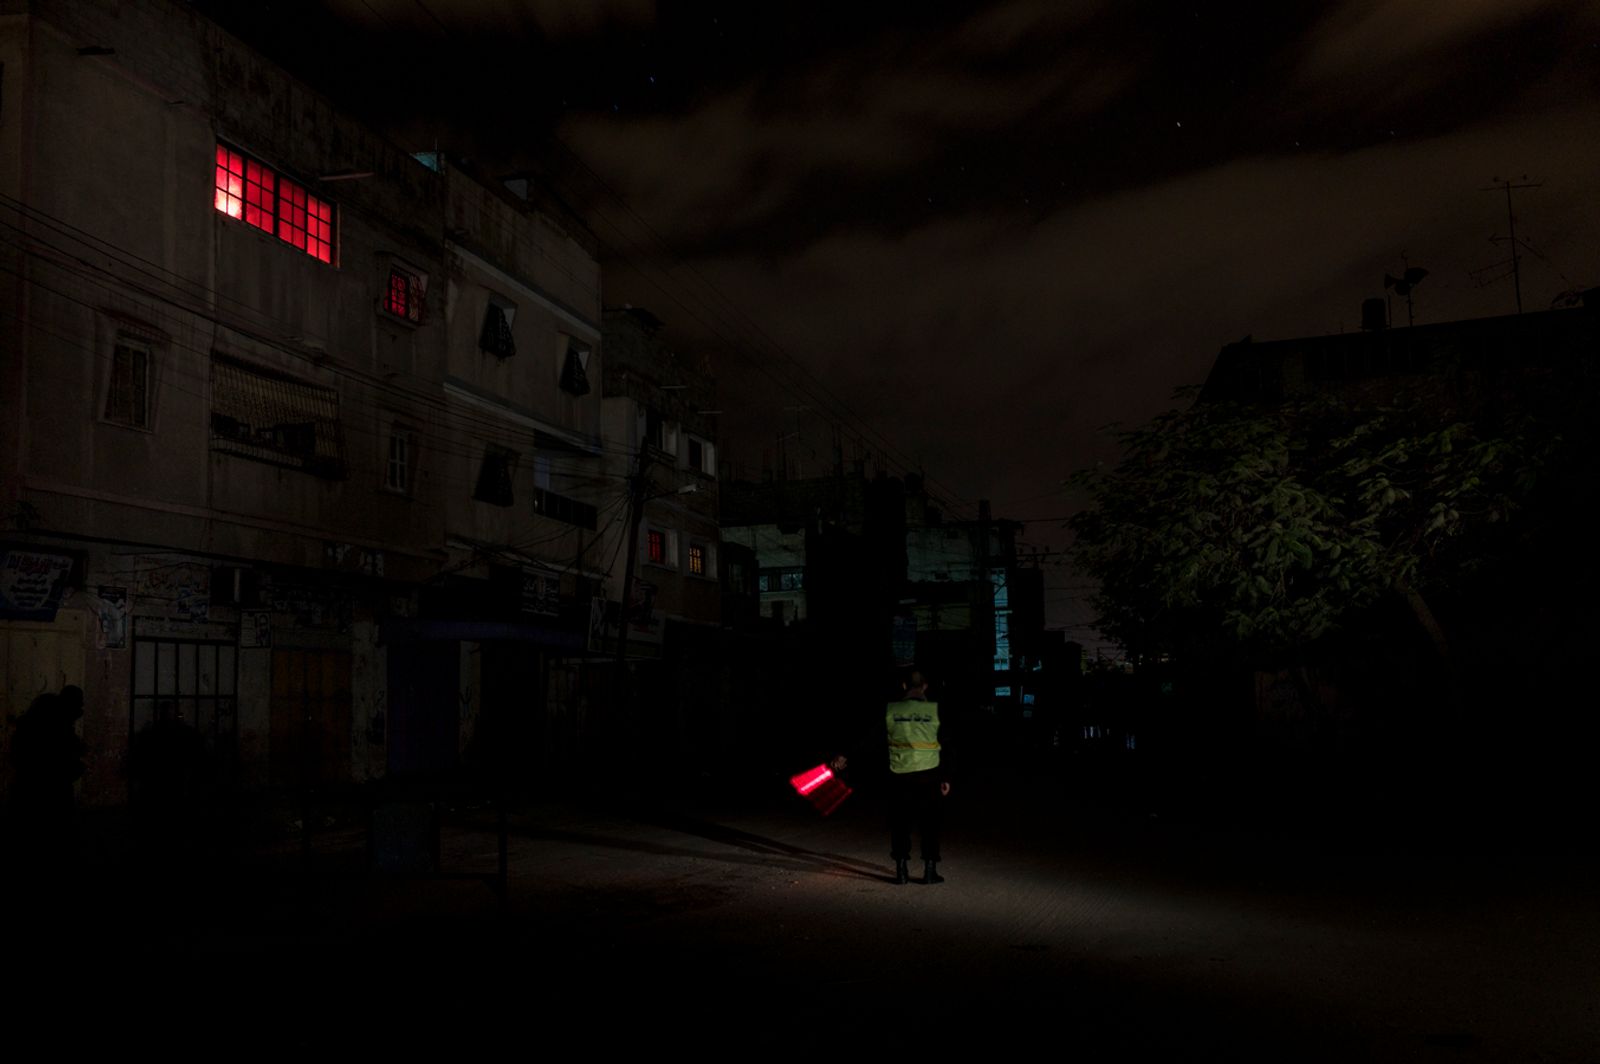 © Gianluca Panella - Image from the Gaza BlackOut photography project